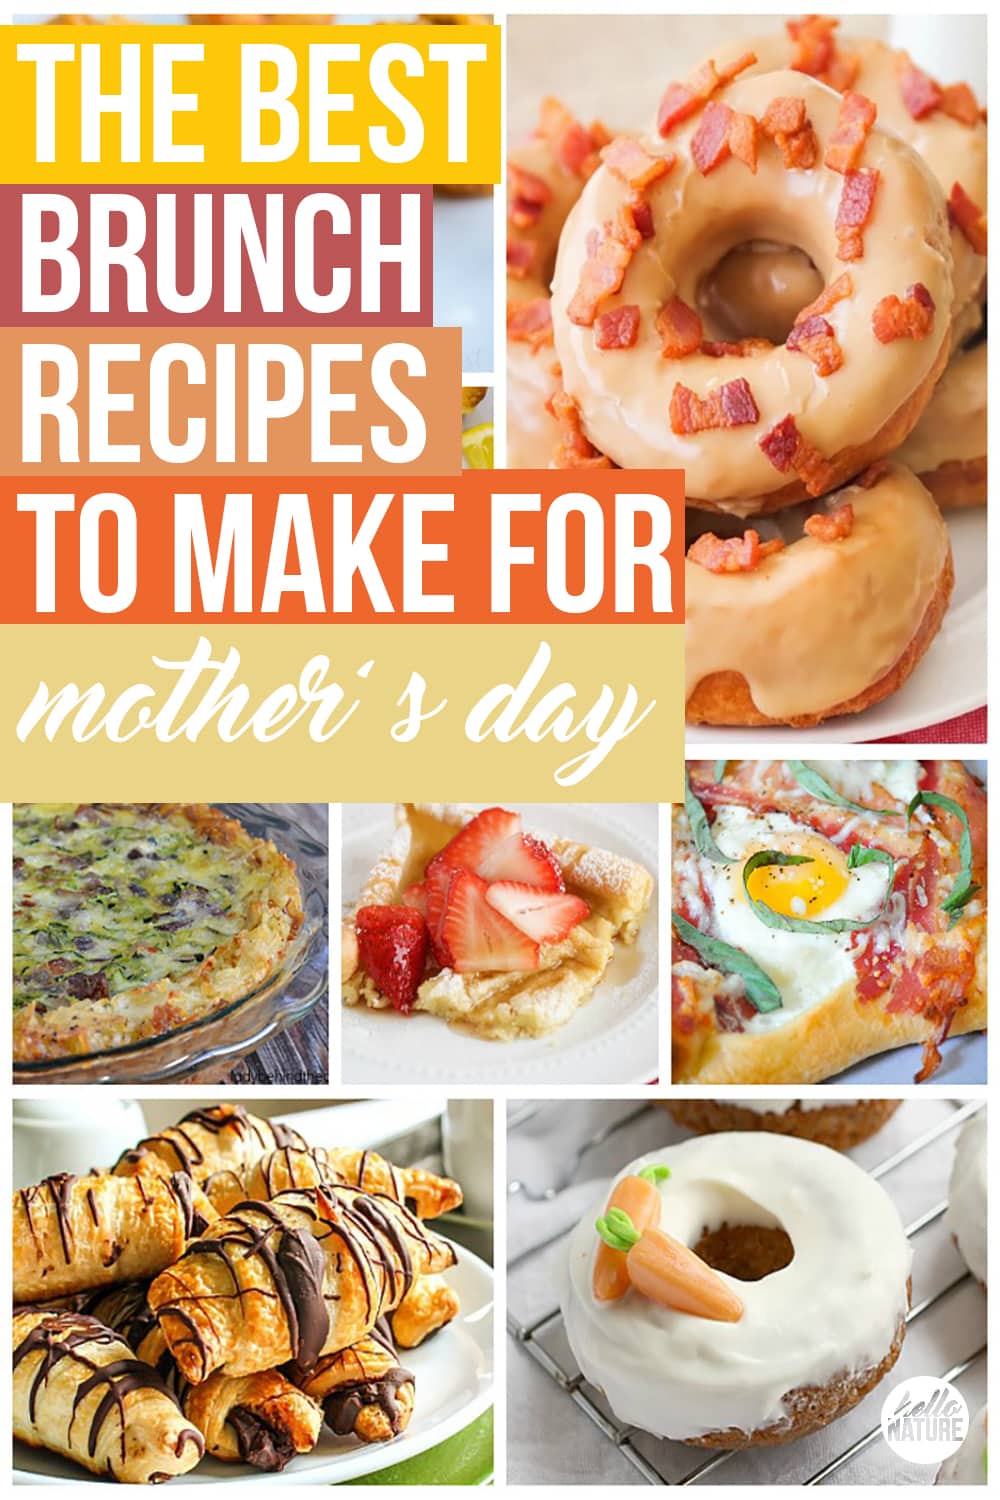 Mom deserves only the best on her special day. Celebrate with these delicious Mother's Day brunch recipes that will please the whole family!